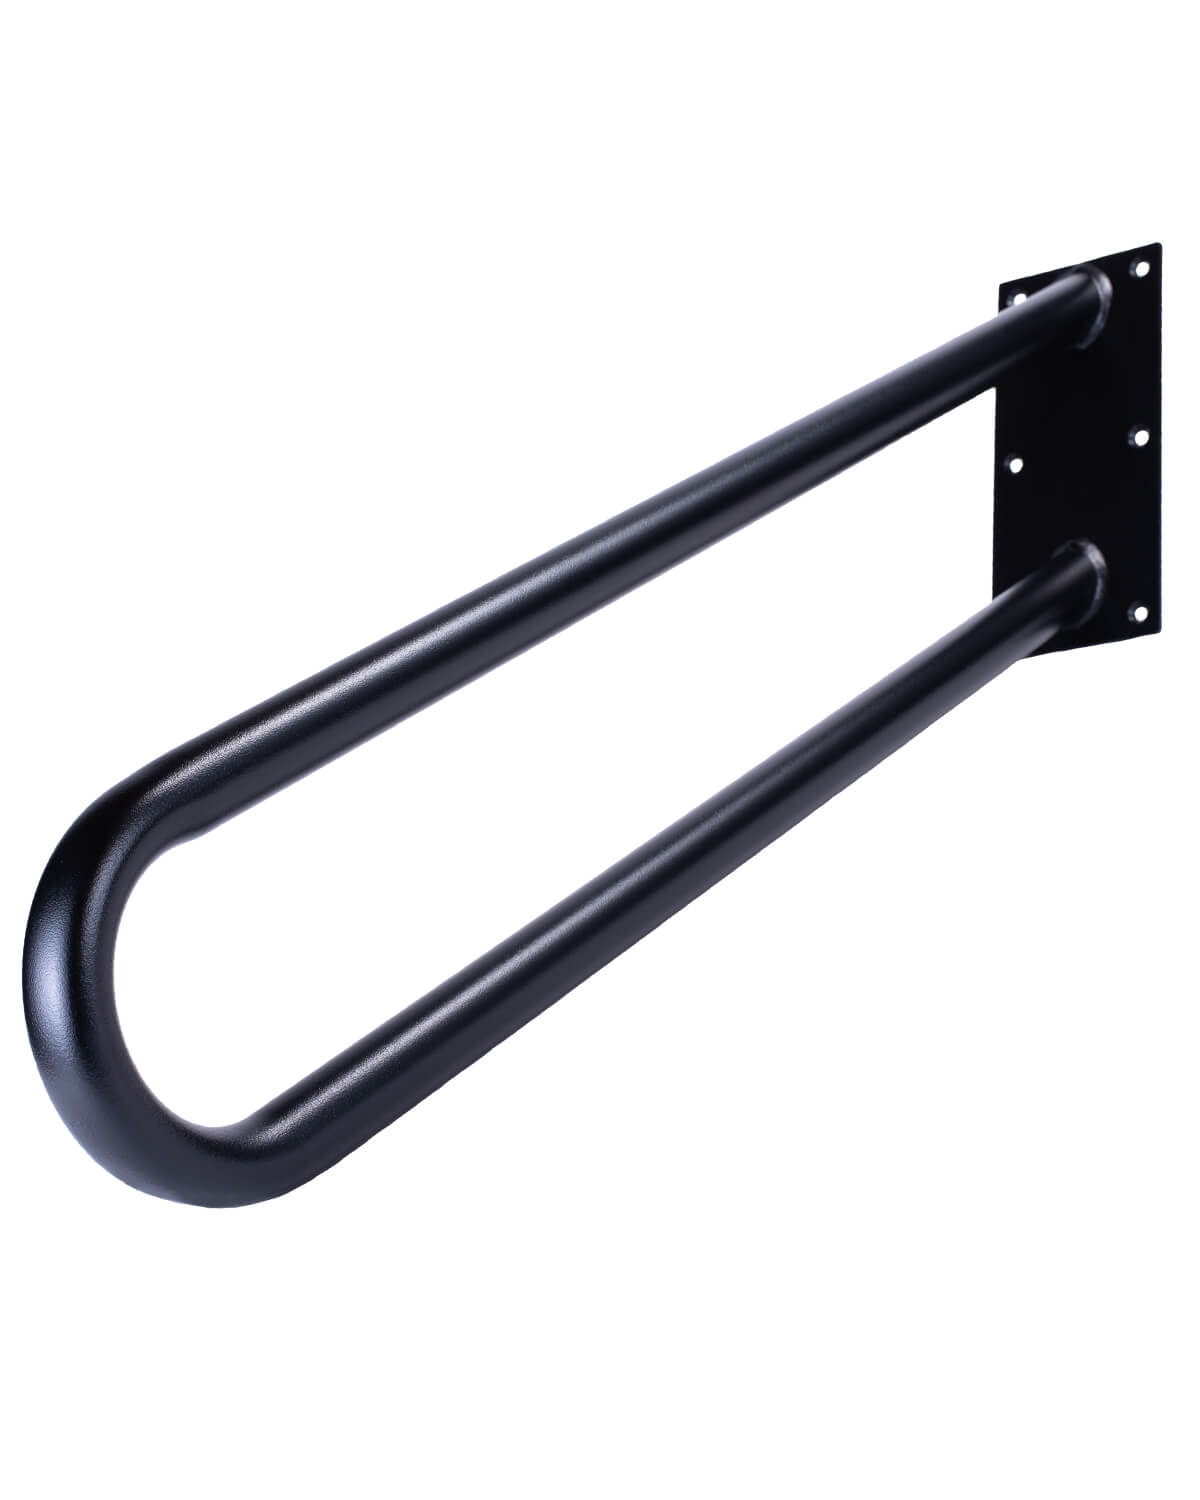 Hold Tight Handrail Wall Mount, Two Sizes - Hold-Tight Handrails 